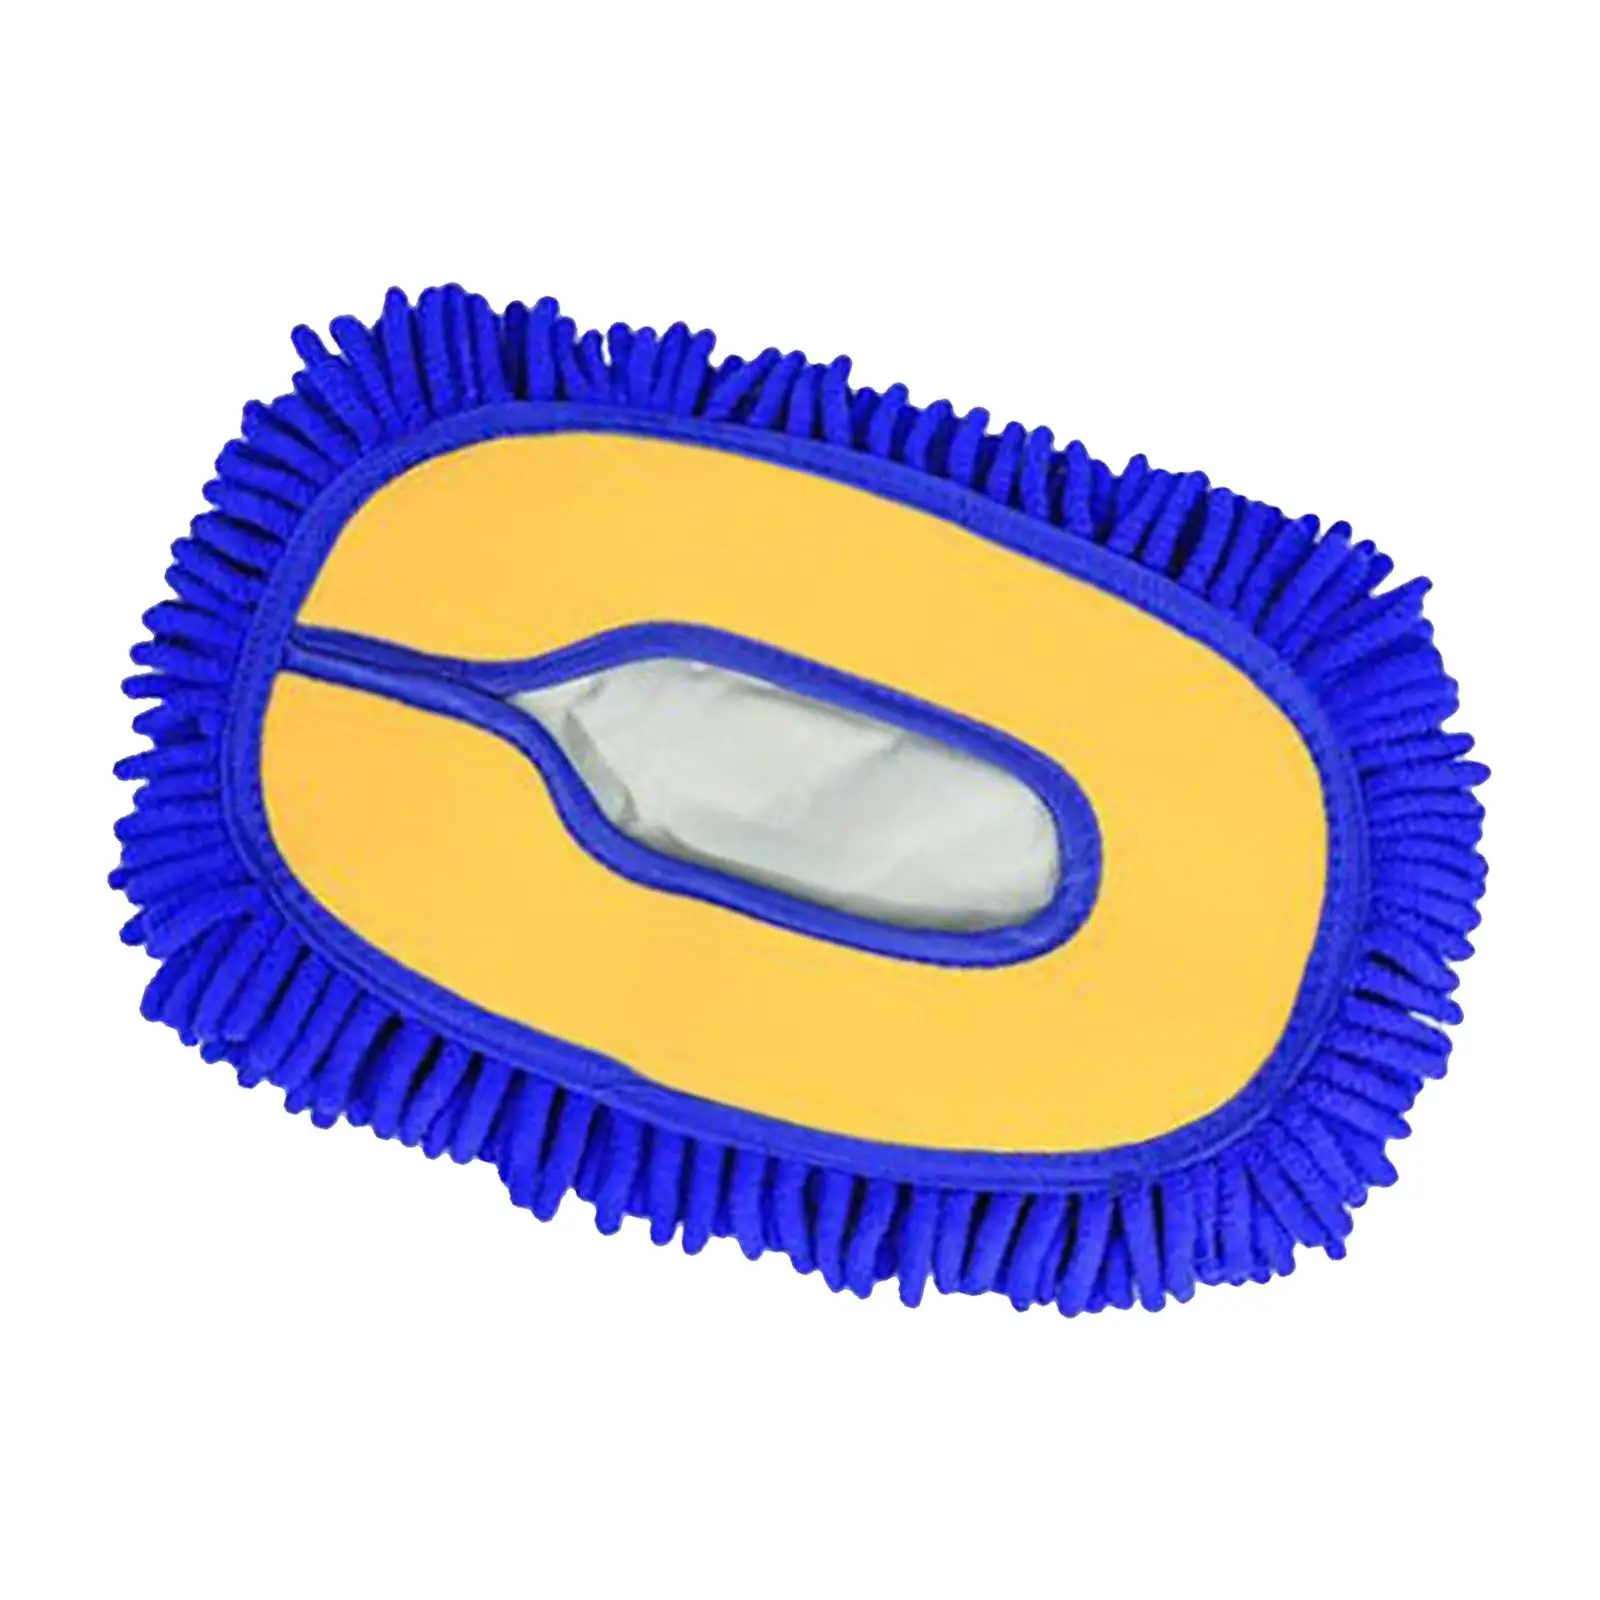 Microfiber Car Wash Brush Replacement Head Accessory Highly Absorbent Soft